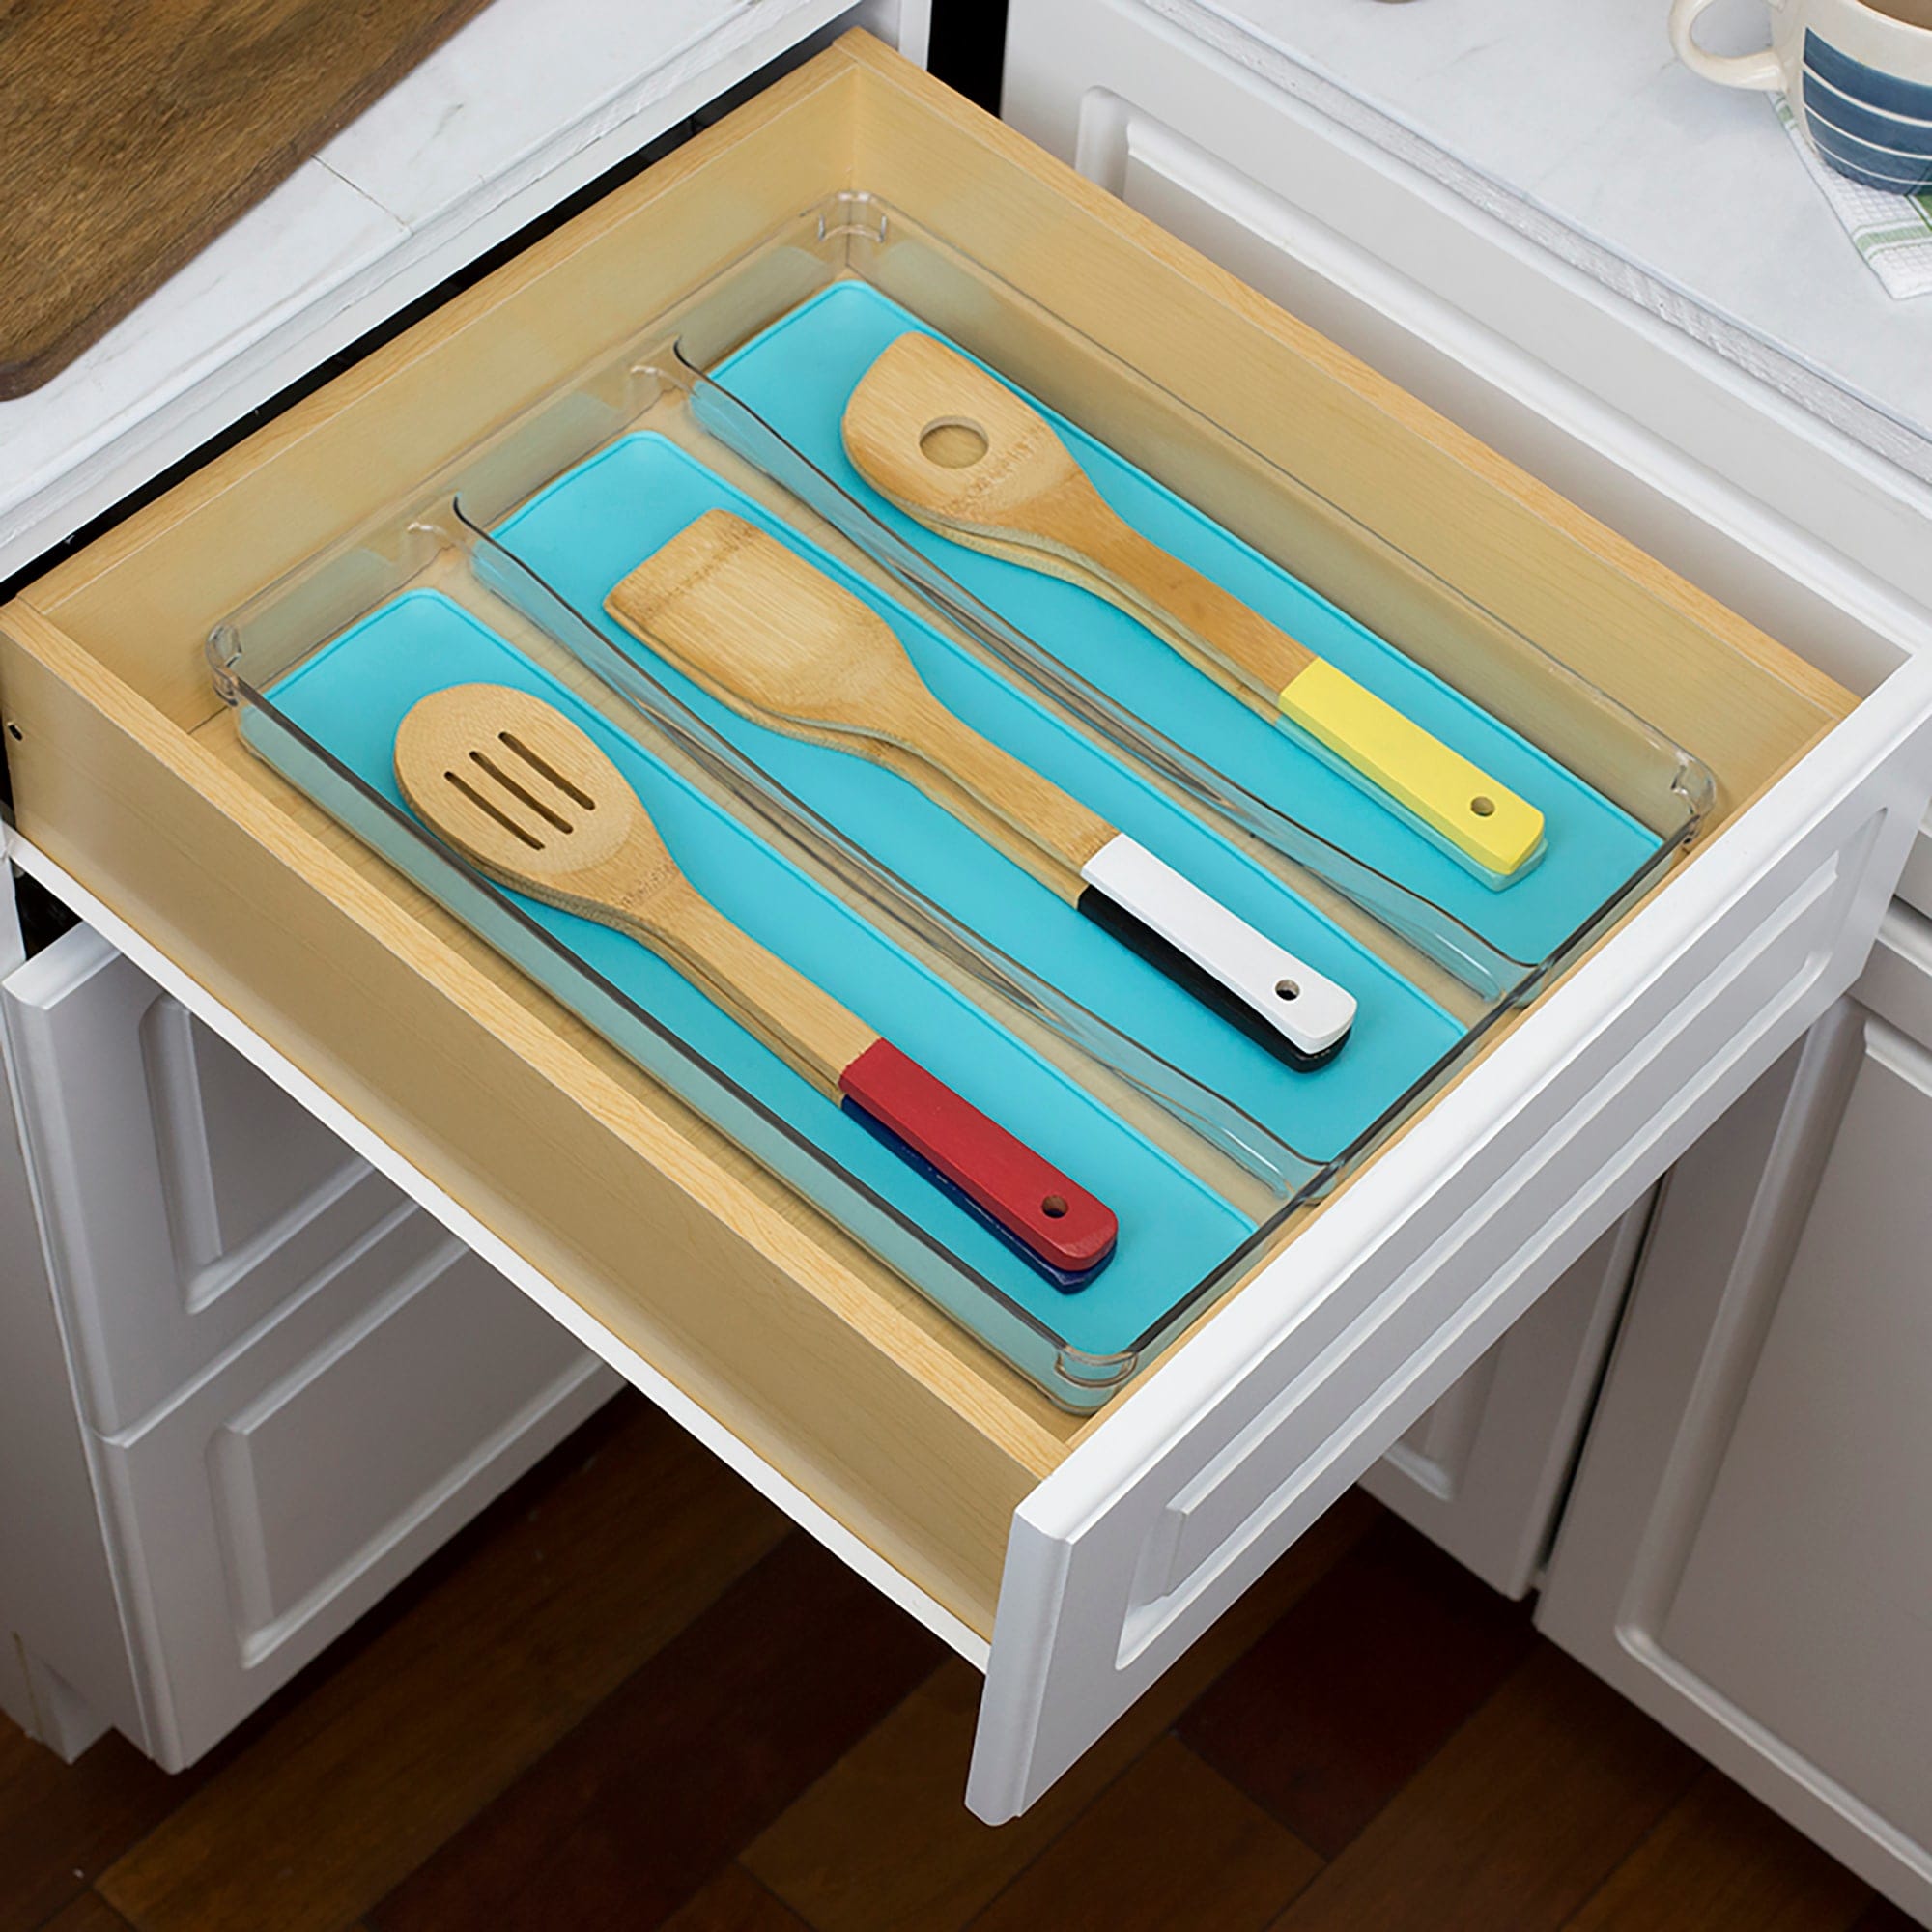 Home Basics Plastic Cutlery Tray with Rubber-Lined Compartments, Turquoise $10 EACH, CASE PACK OF 12